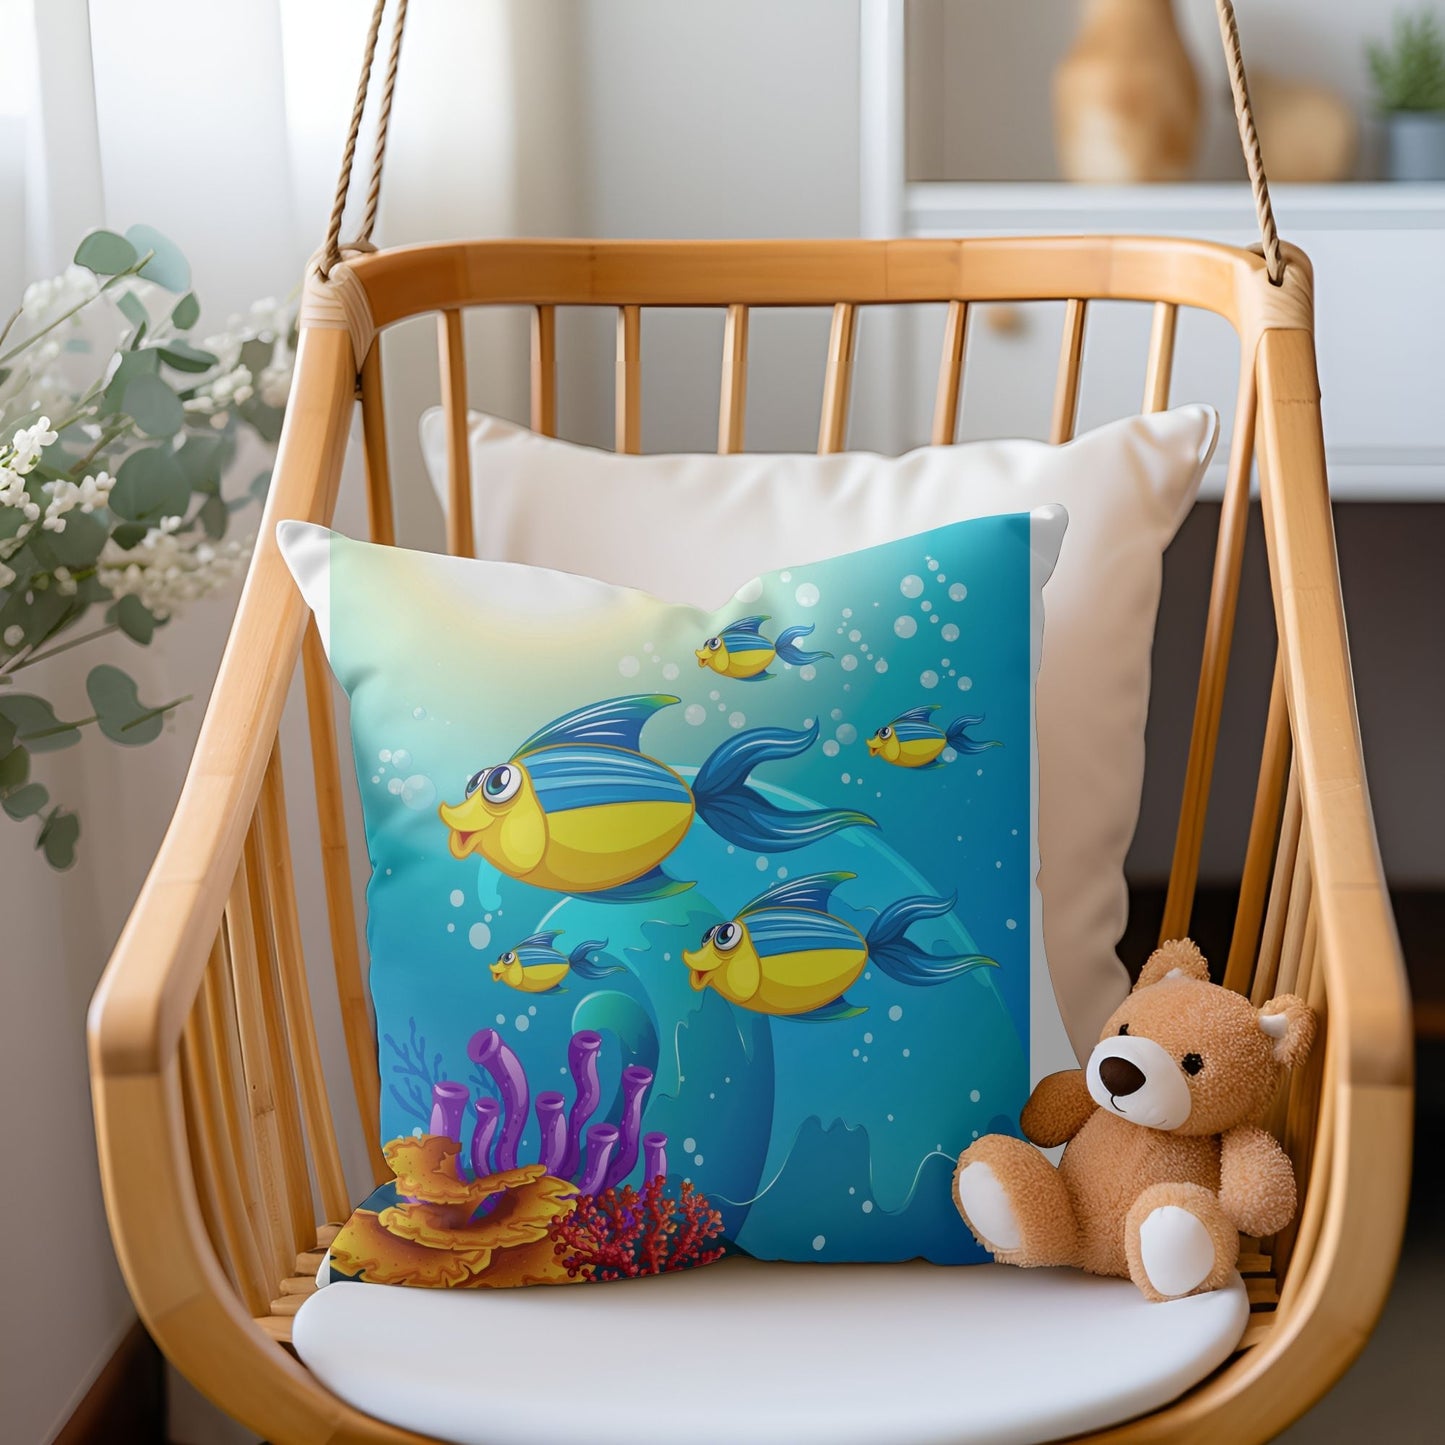 Adorable ocean fishes patterned pillow to add a splash of color to kids' bedrooms.